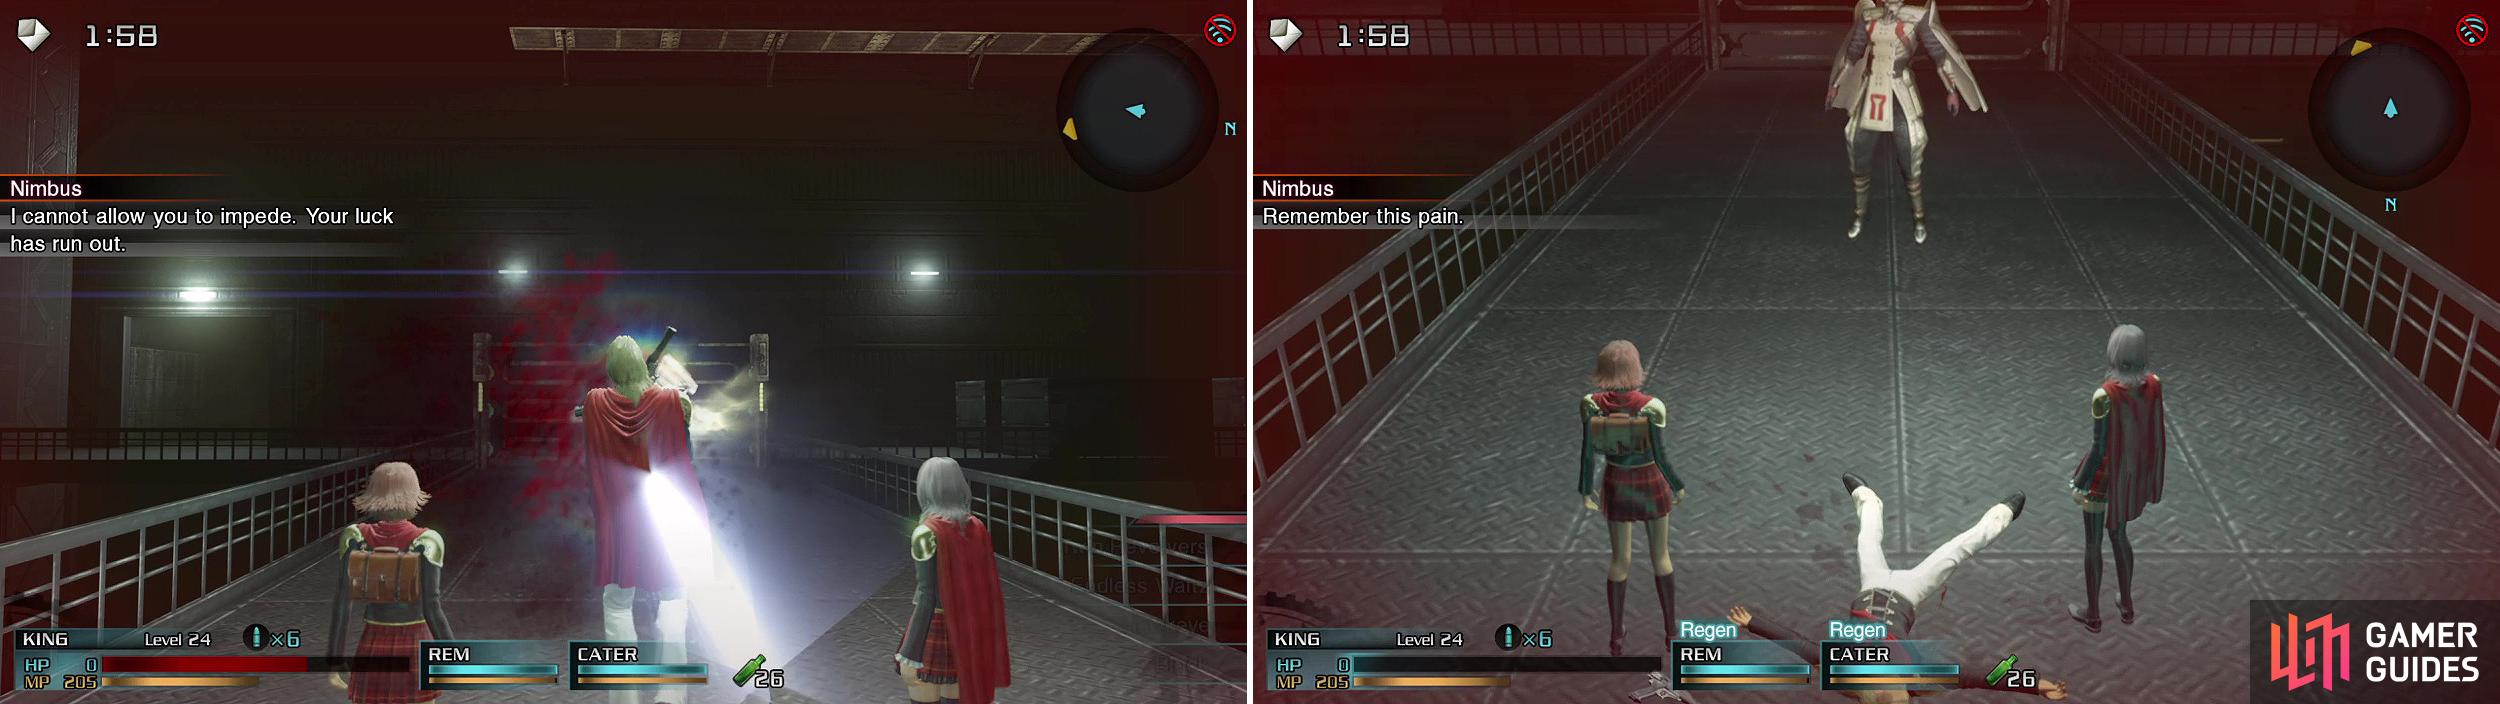 Nimbus will appear out of nowhere and kill your active leader (left). If this is a character you like, make sure you have a way to revive them.